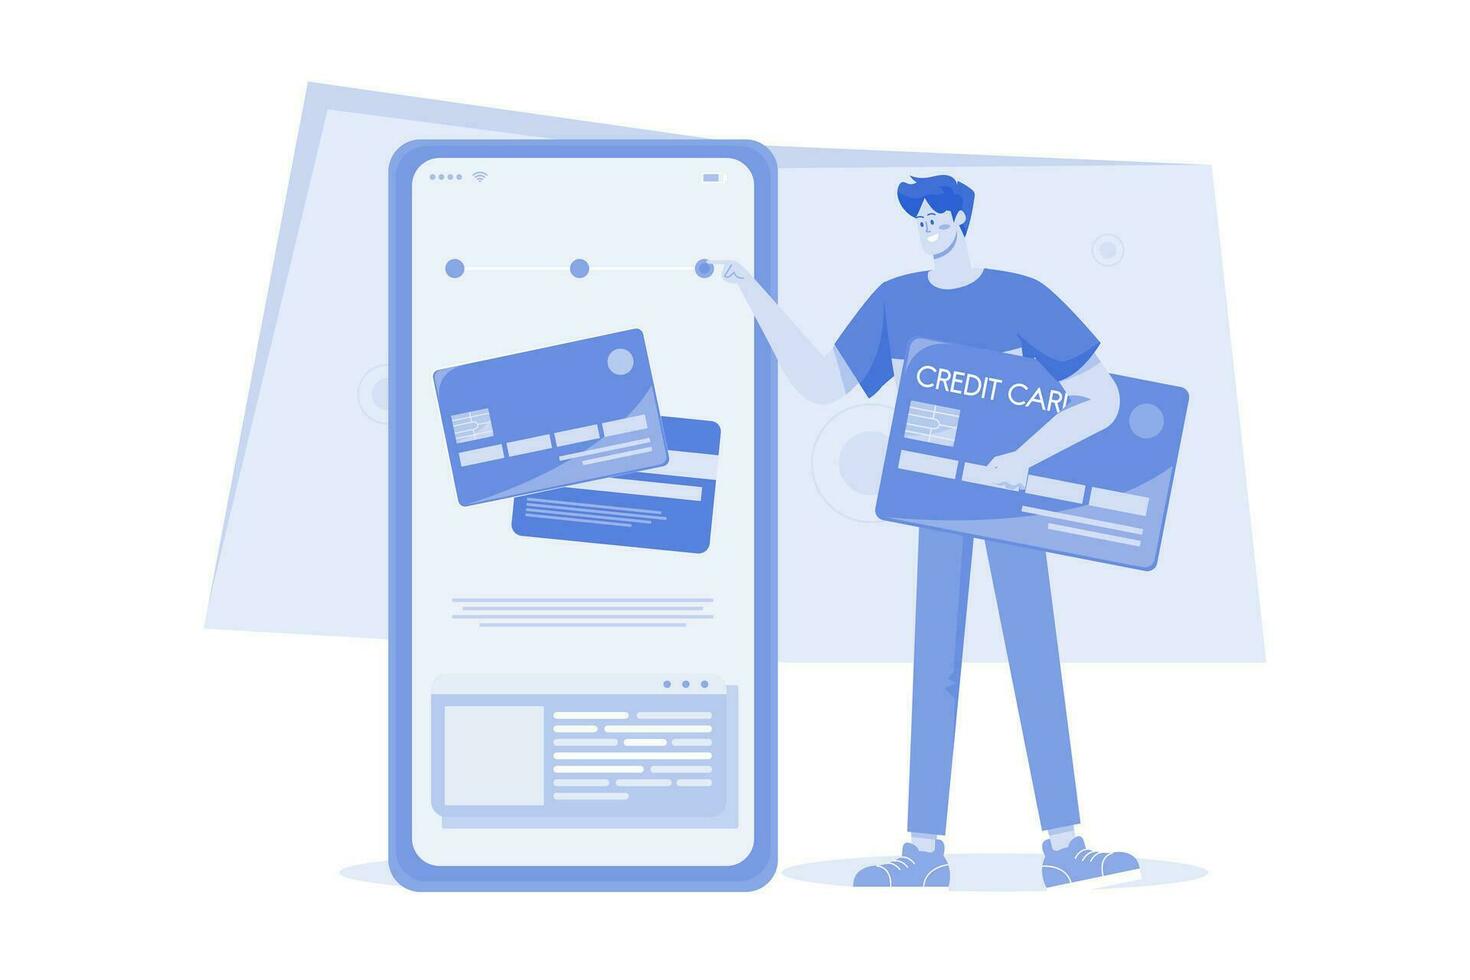 Man Holding Credit Card Illustration concept on a white background vector